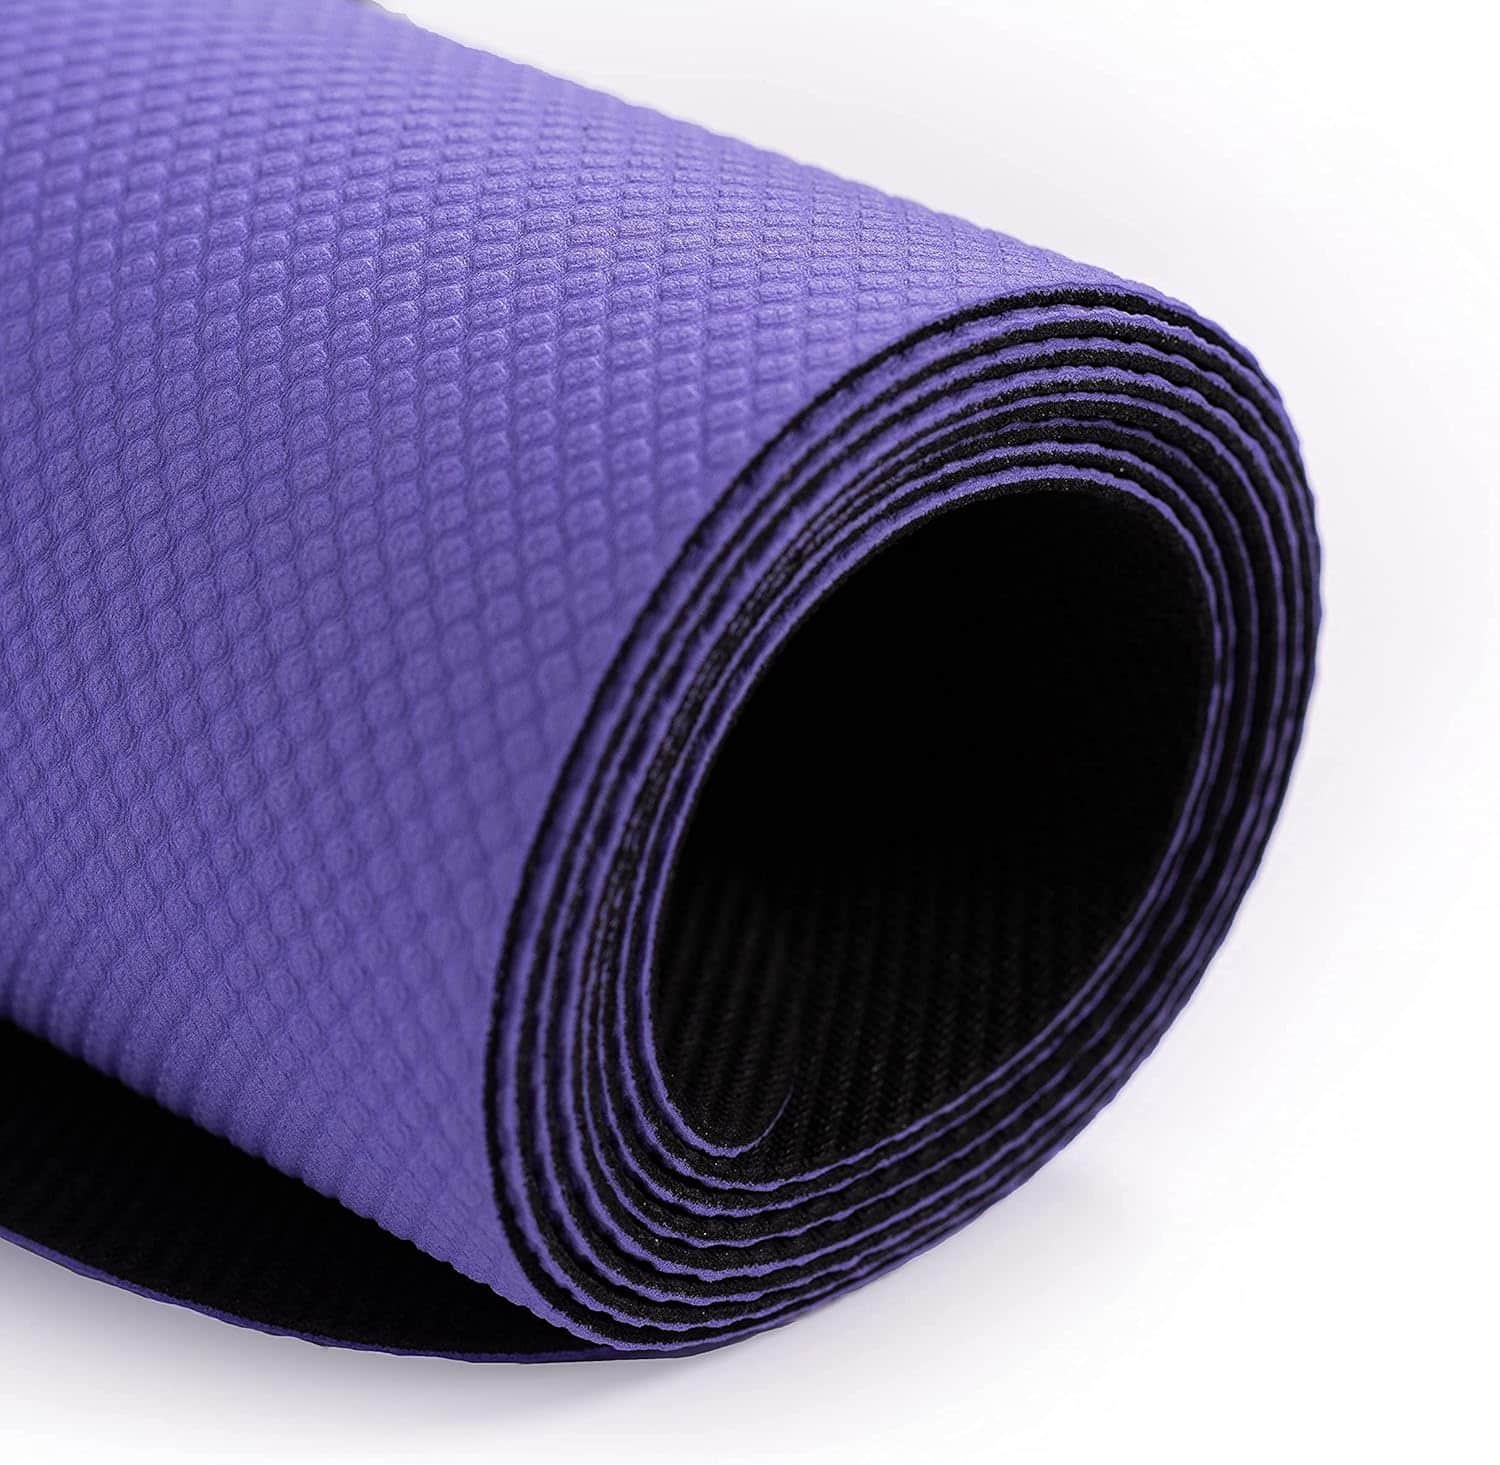 COOLDOT Alignment Yoga Mat - The Perfect Yoga Mat for Enhanced Alignment and Stability